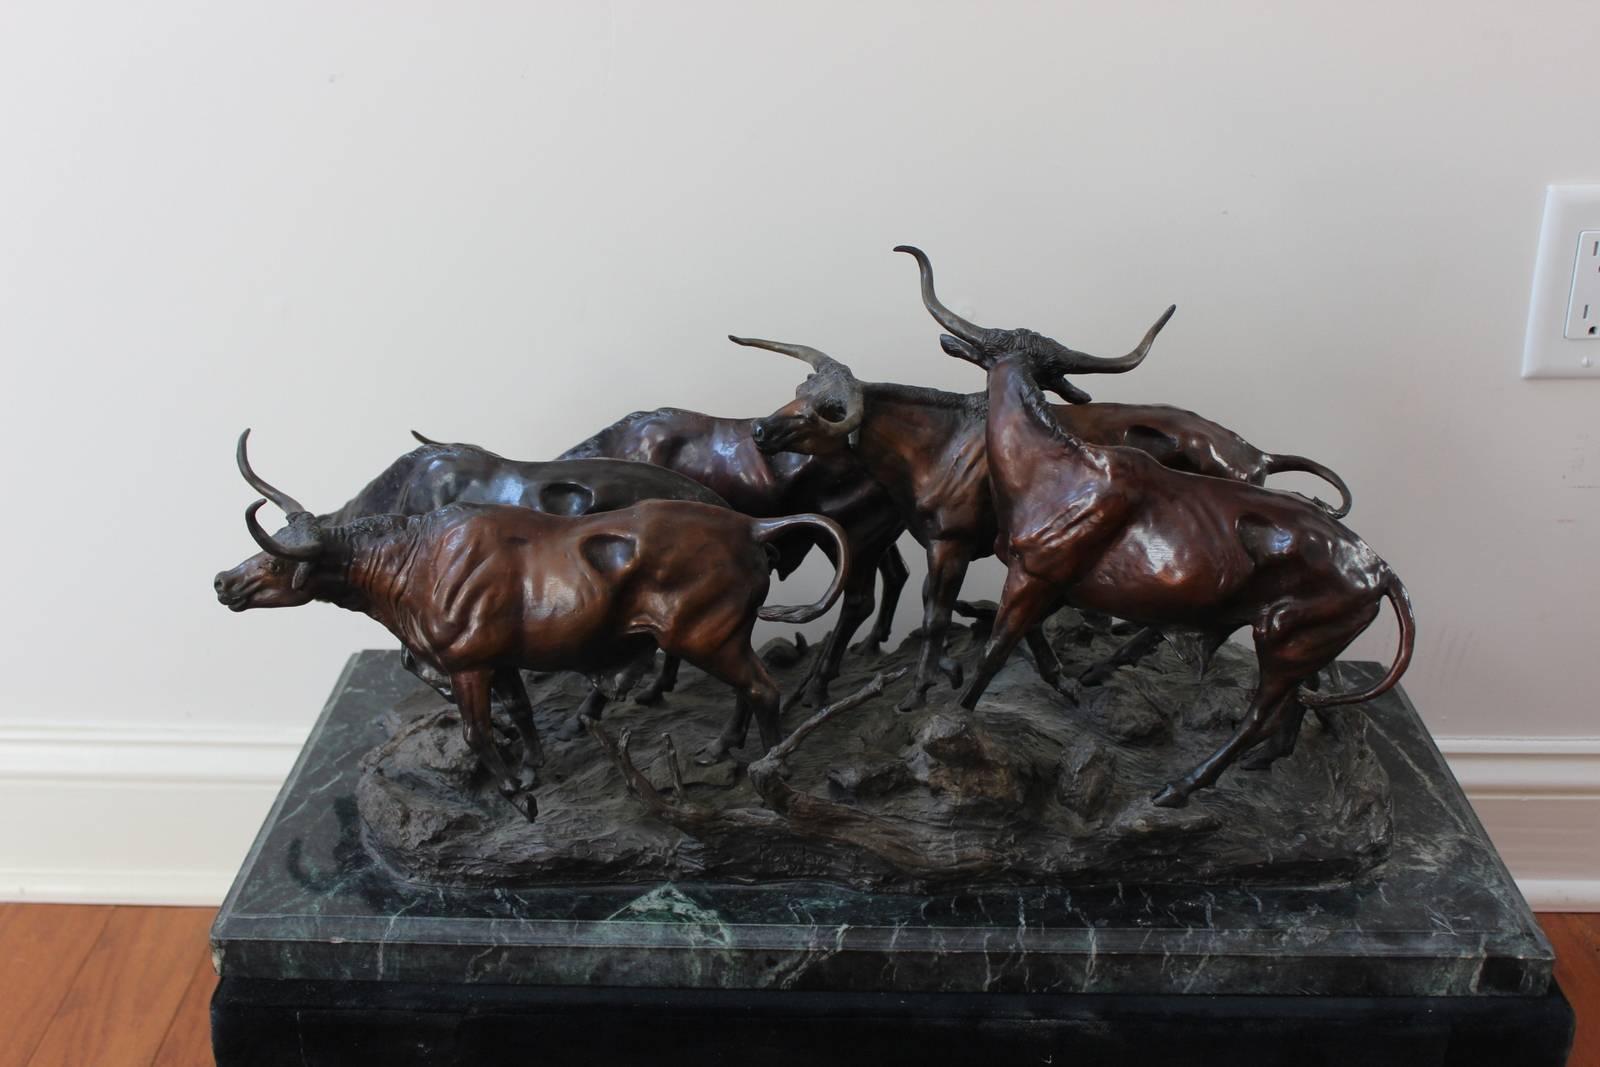 This older cast and beautiful patina is just amazing. Called Cattle Drifting Before the Storm. Inspired by Remington. This is not part of the series of 500 which are new and lesser quality.

Roy Harris' bronze sculptures seem ready to leap from